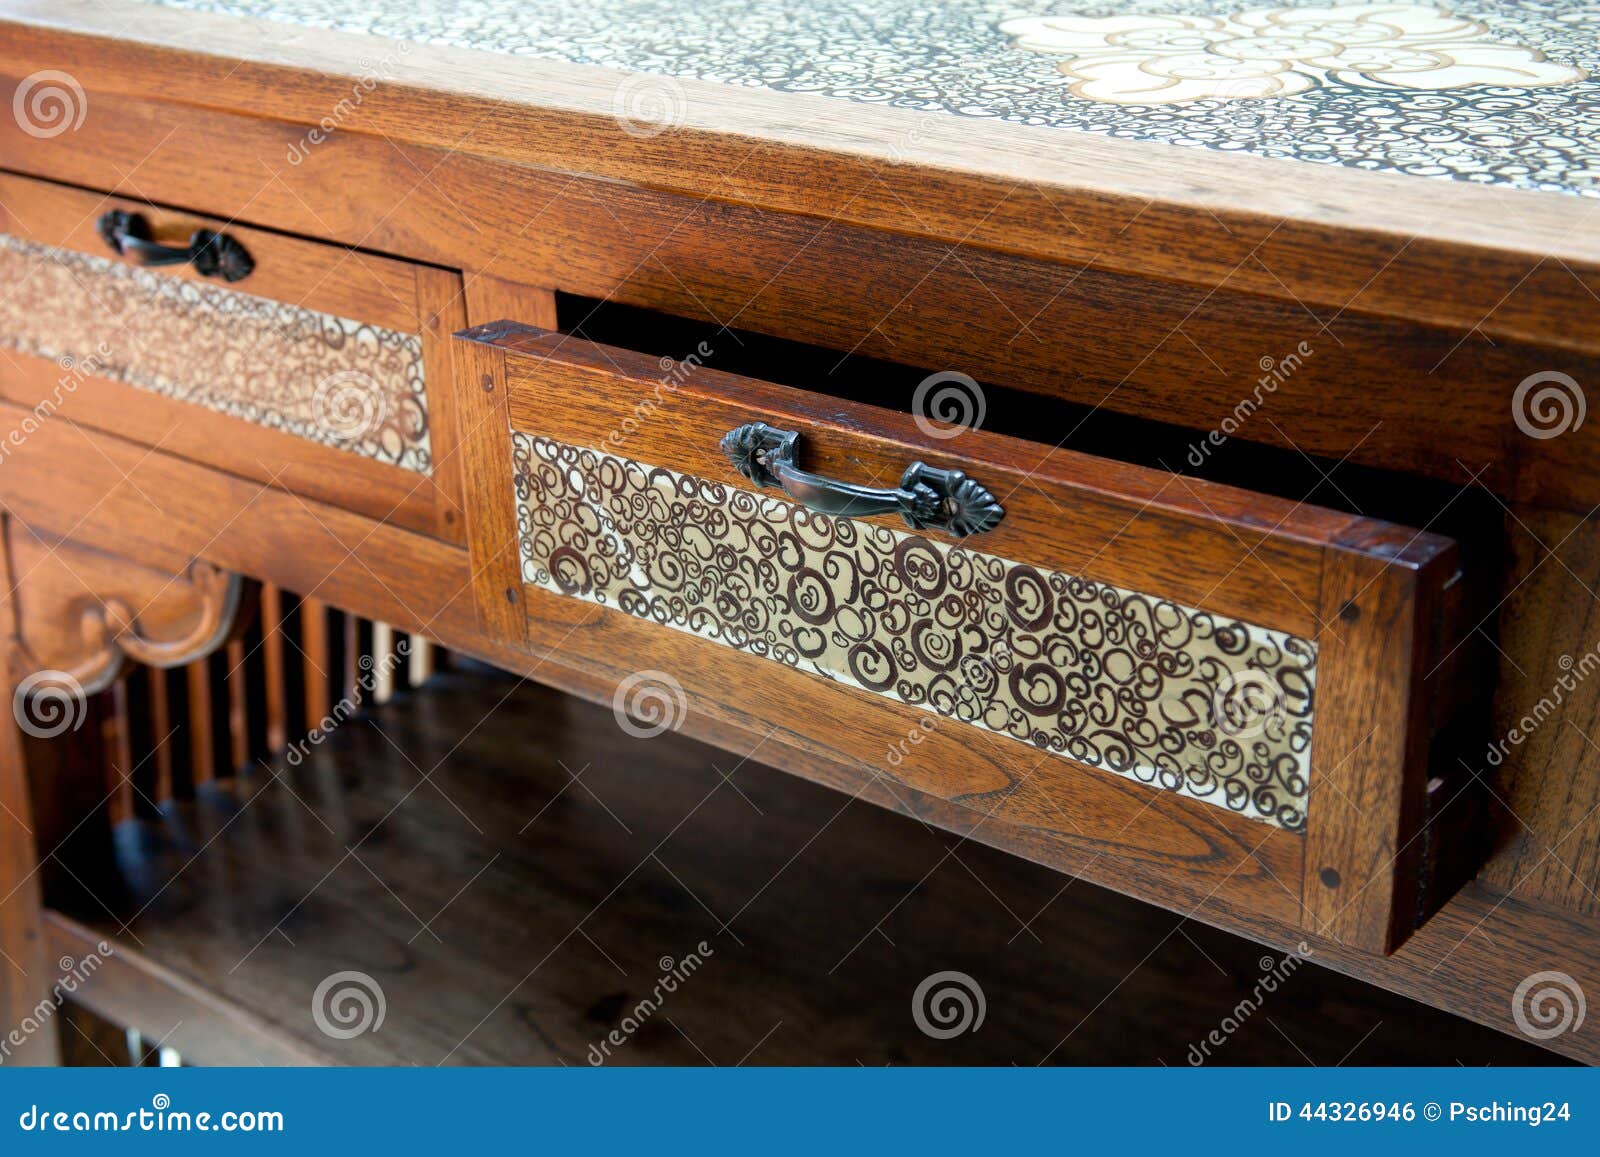 Retro Wooden Table With Opened Drawer Stock Photo Image Of Wood